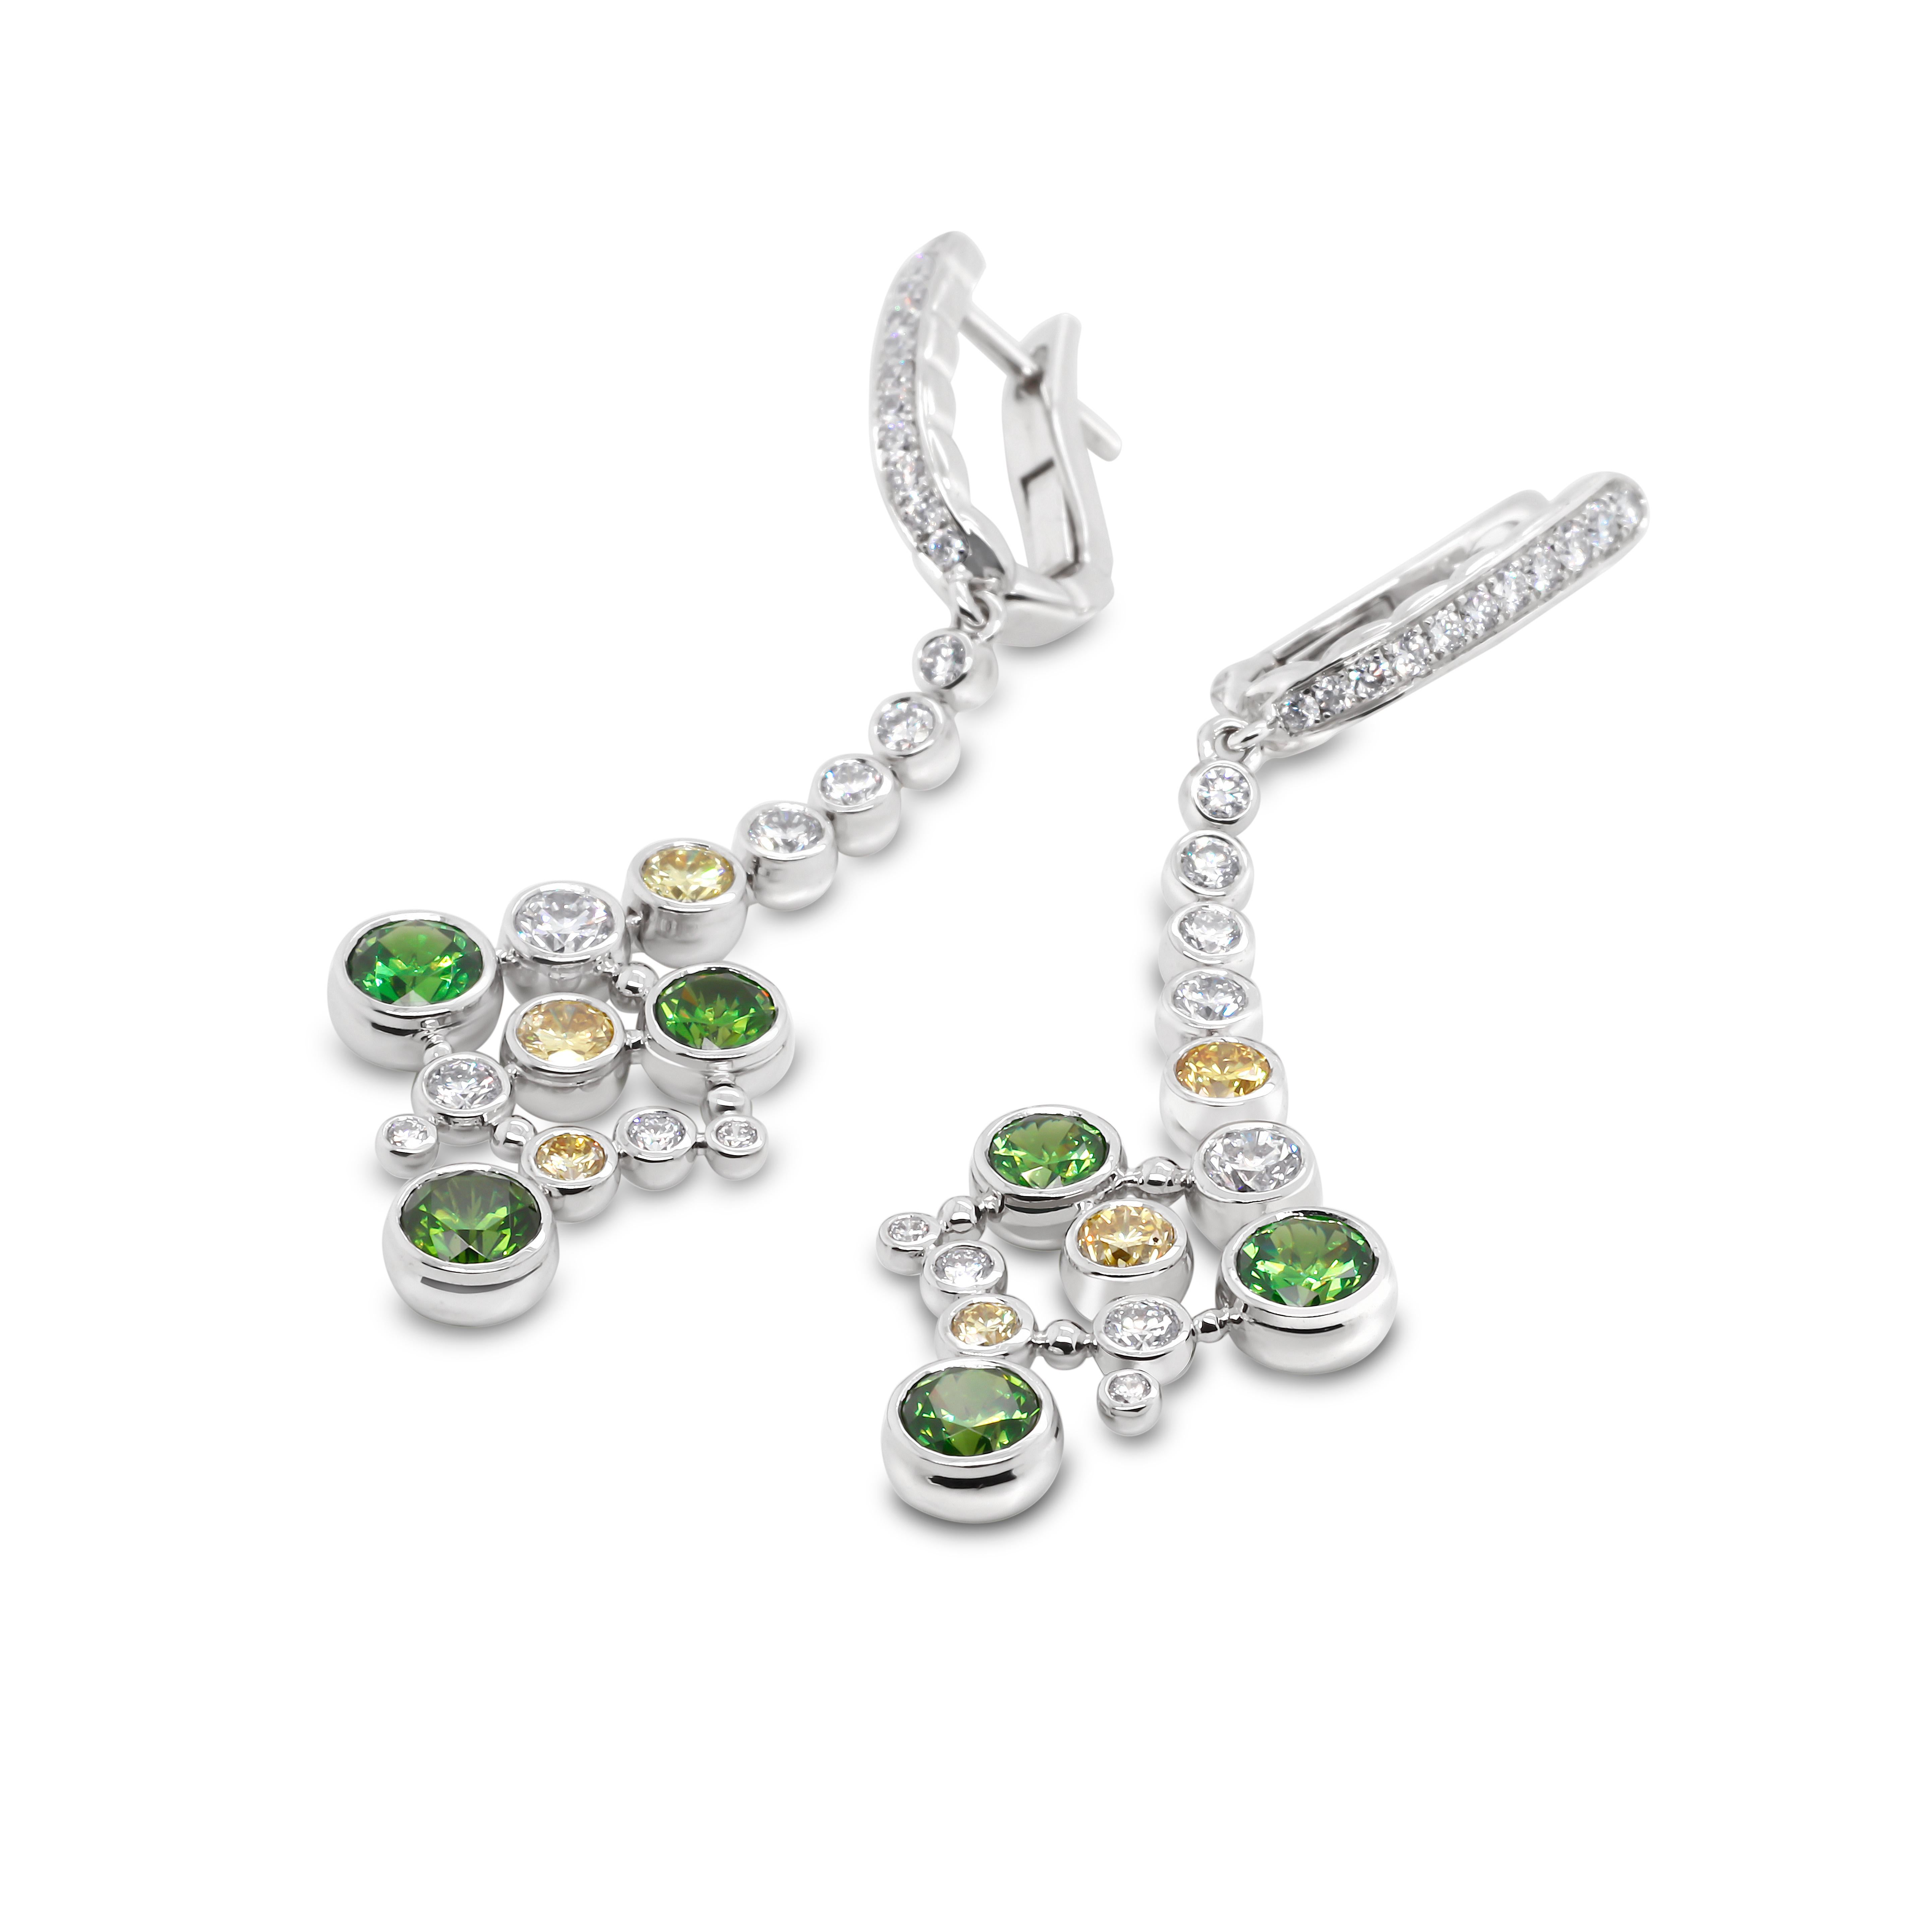 Elegant and gorgeous Russian Demantoid Earrings, luxurious and intricate at the same time. They are perfect as for special occasion as for everyday wear! 
In these earrings top quality Demantoids totalling 2.48 ct combined with natural fancy yellow